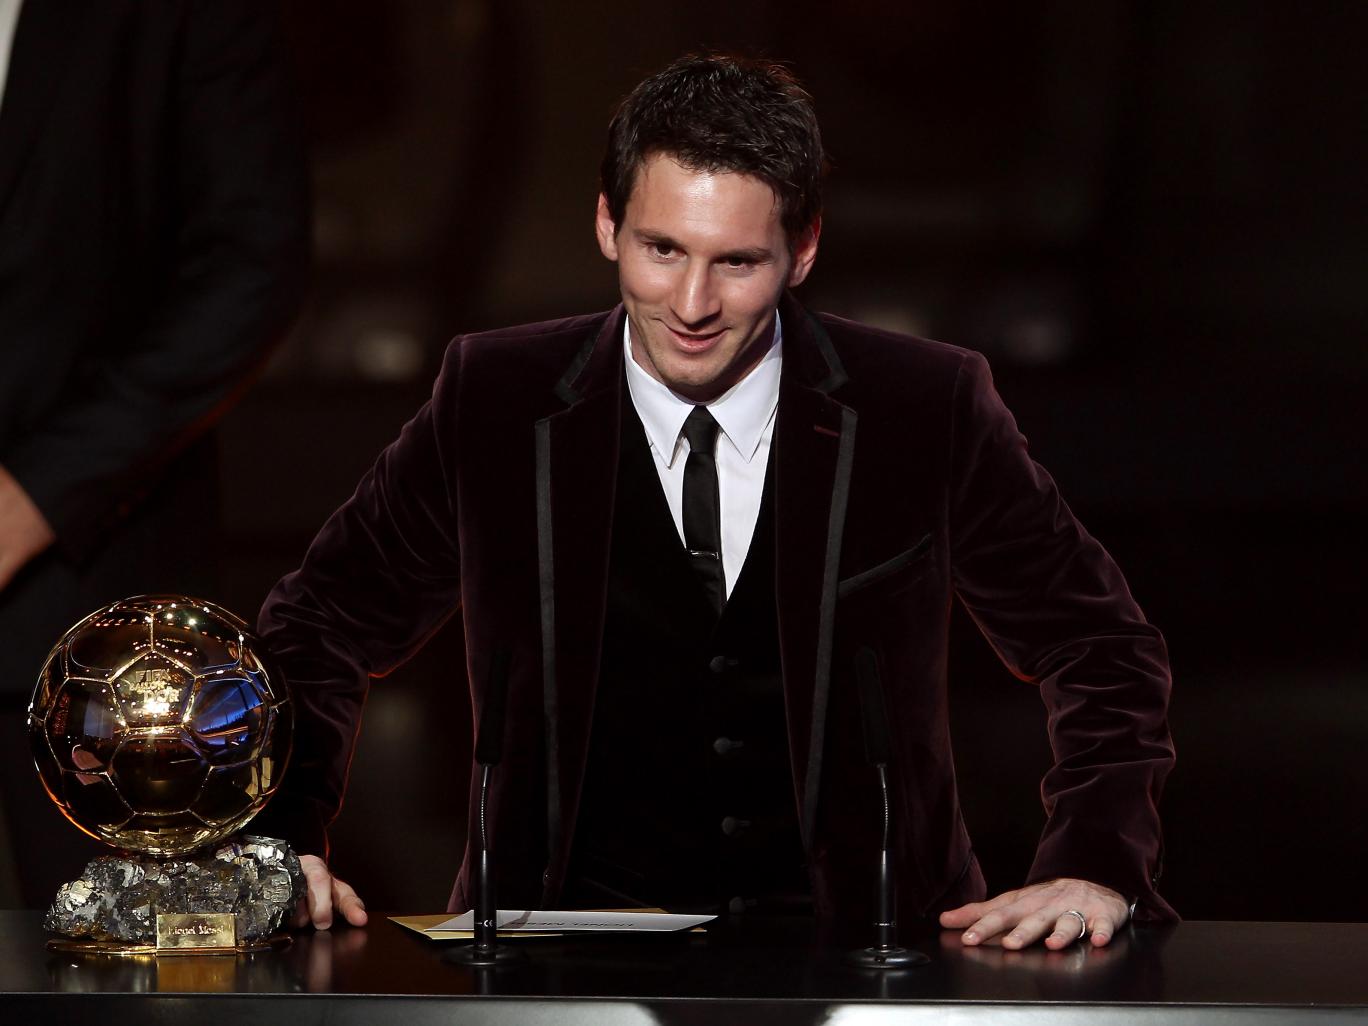 Wenger picks Messi to win the Ballon d' Or